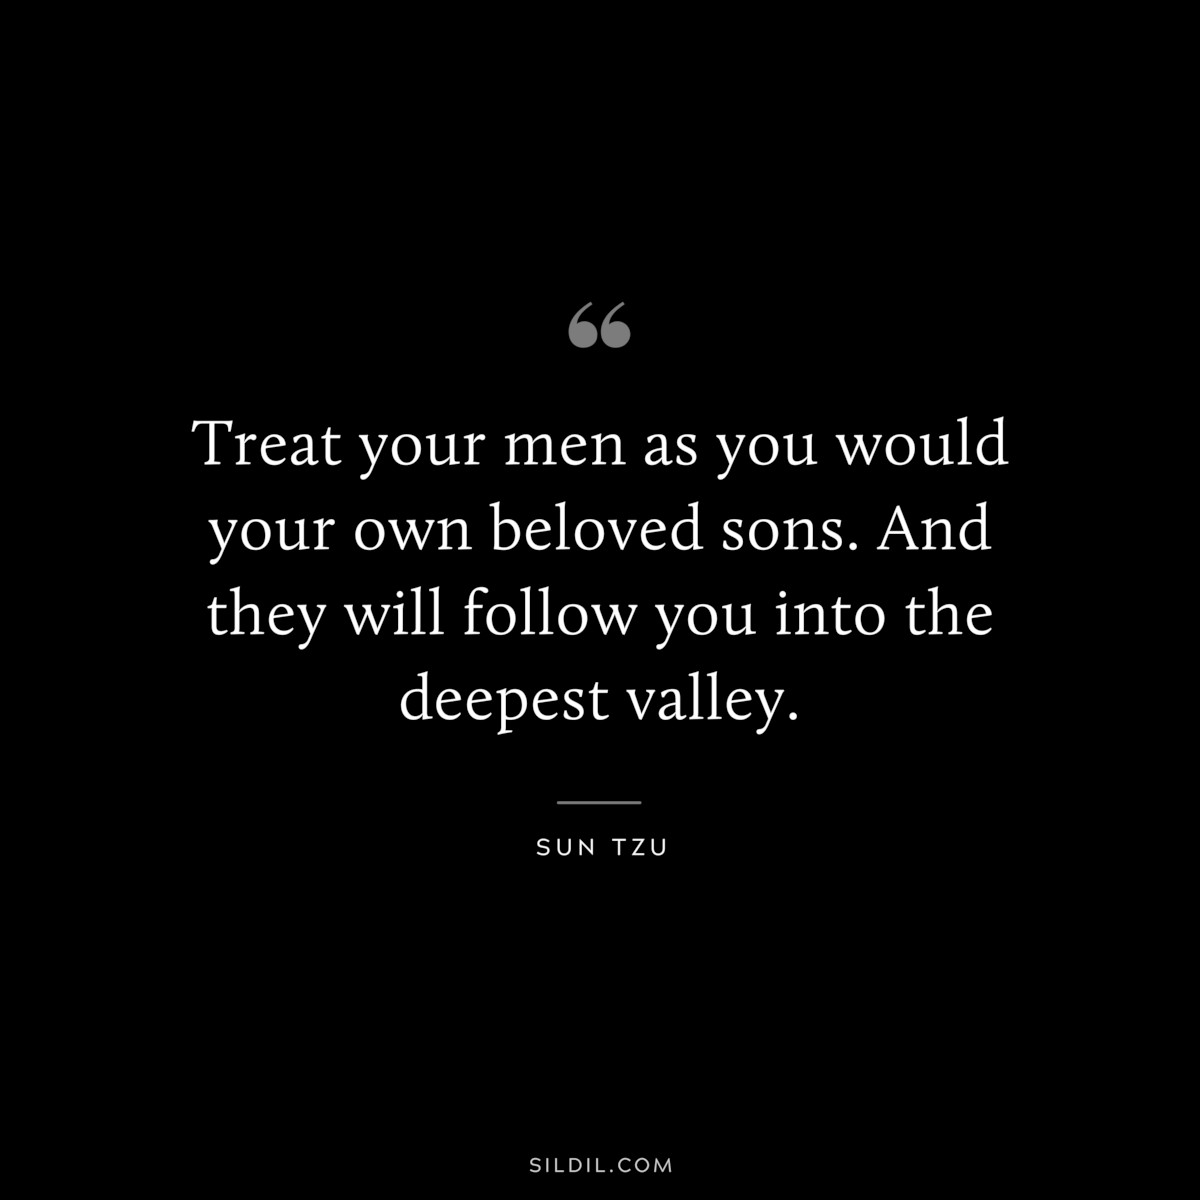 Treat your men as you would your own beloved sons. And they will follow you into the deepest valley.― Sun Tzu